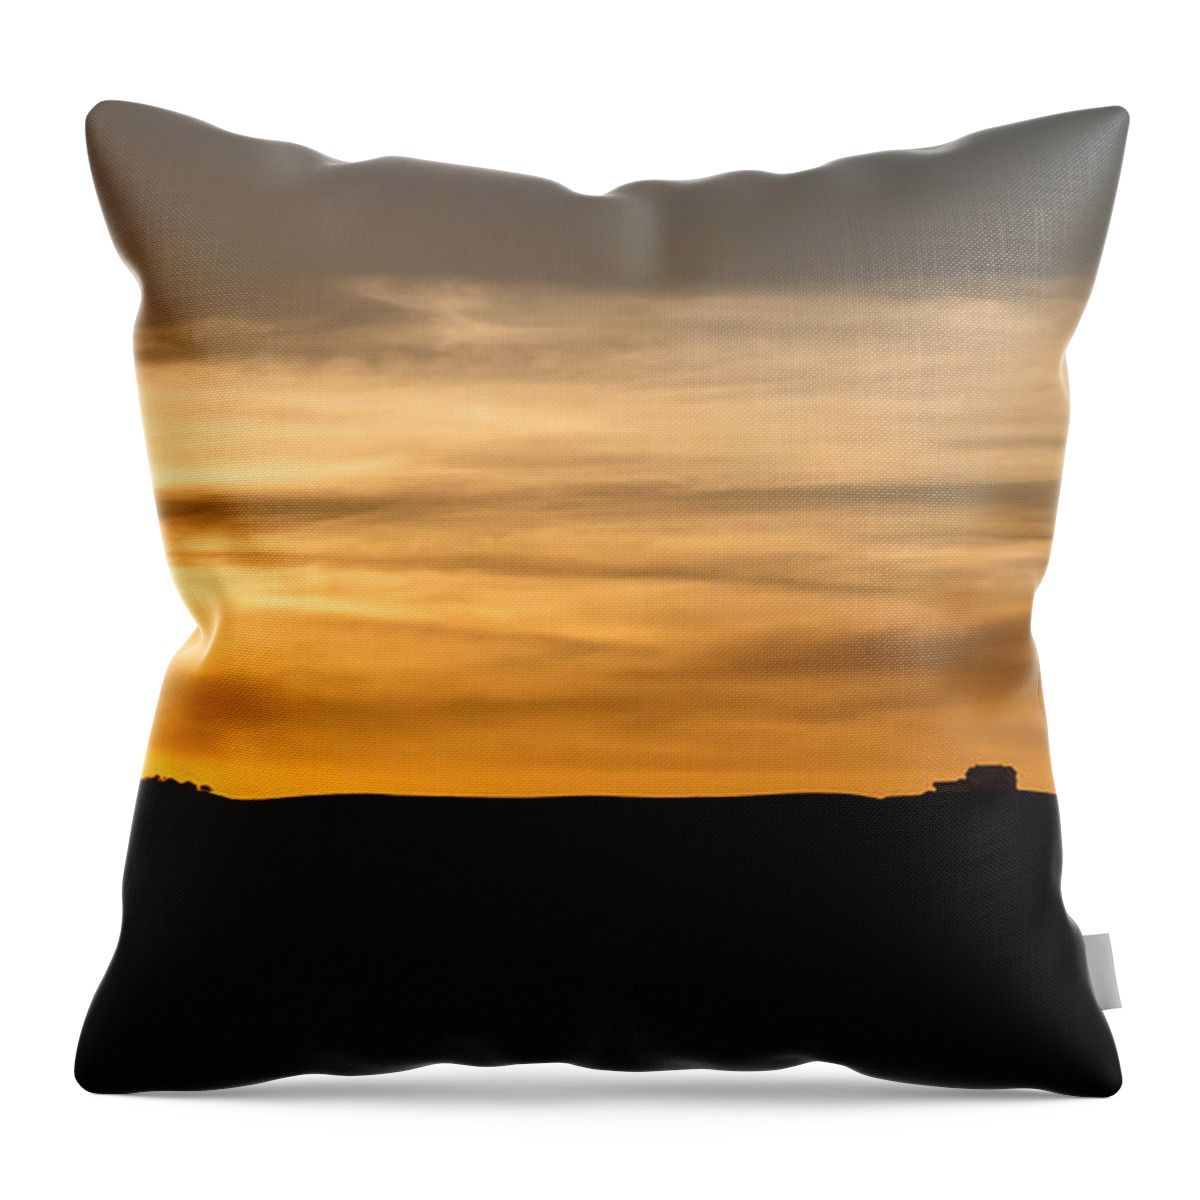 Cml Brown Throw Pillow featuring the photograph In The Evening I Rest by CML Brown